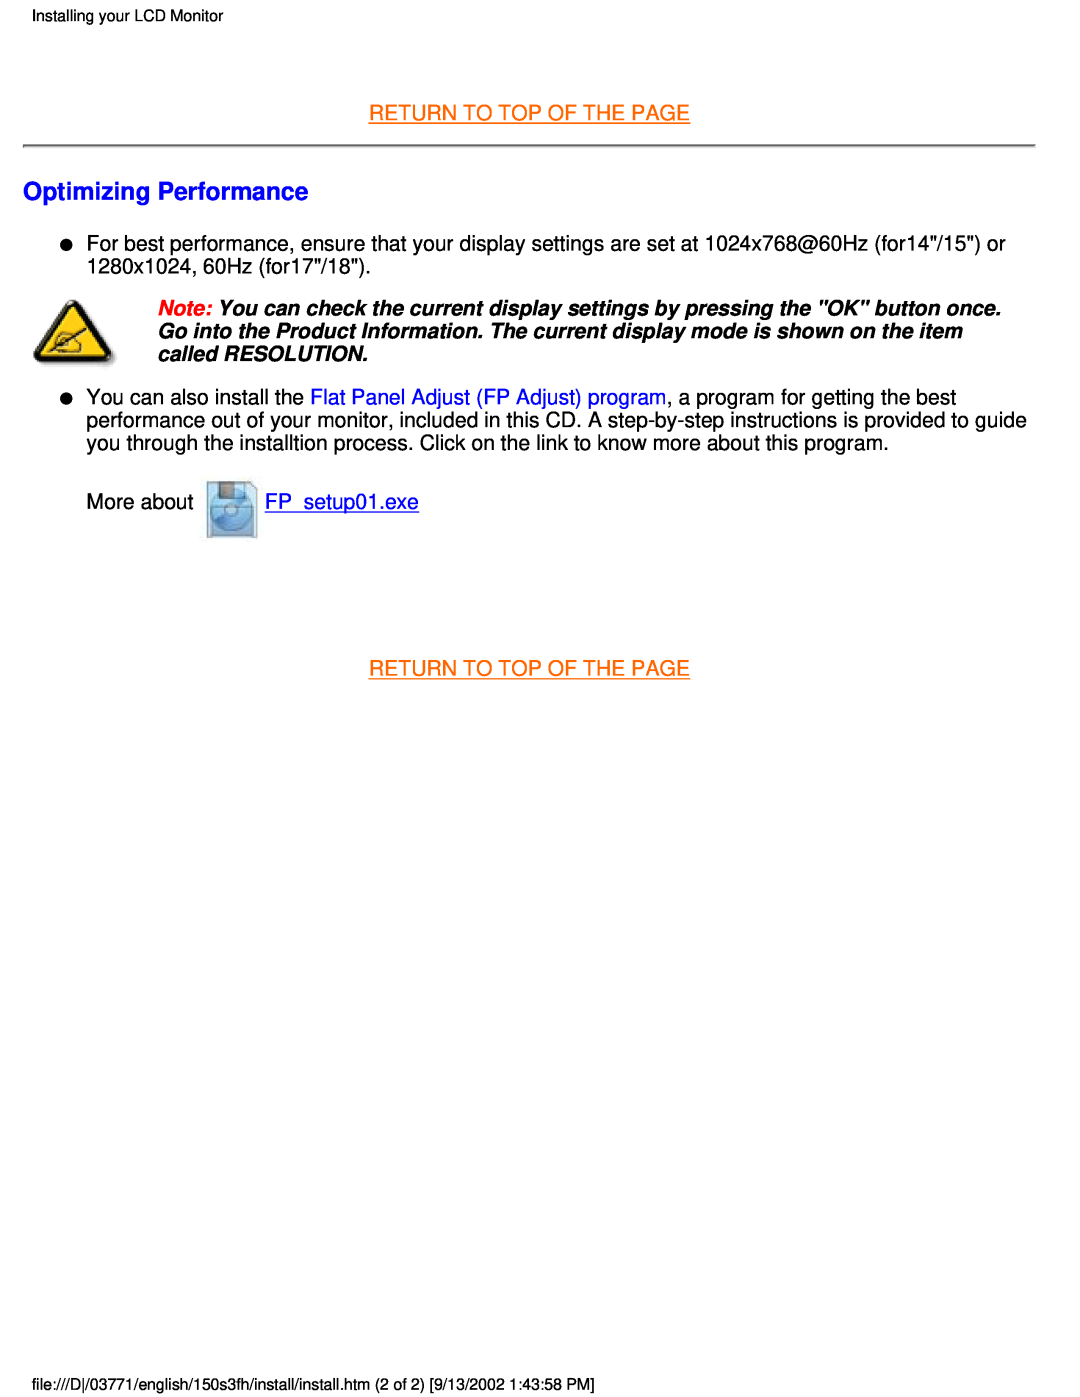 Philips 150S3F user manual Optimizing Performance, Return To Top Of The Page, More about FPsetup01.exe 